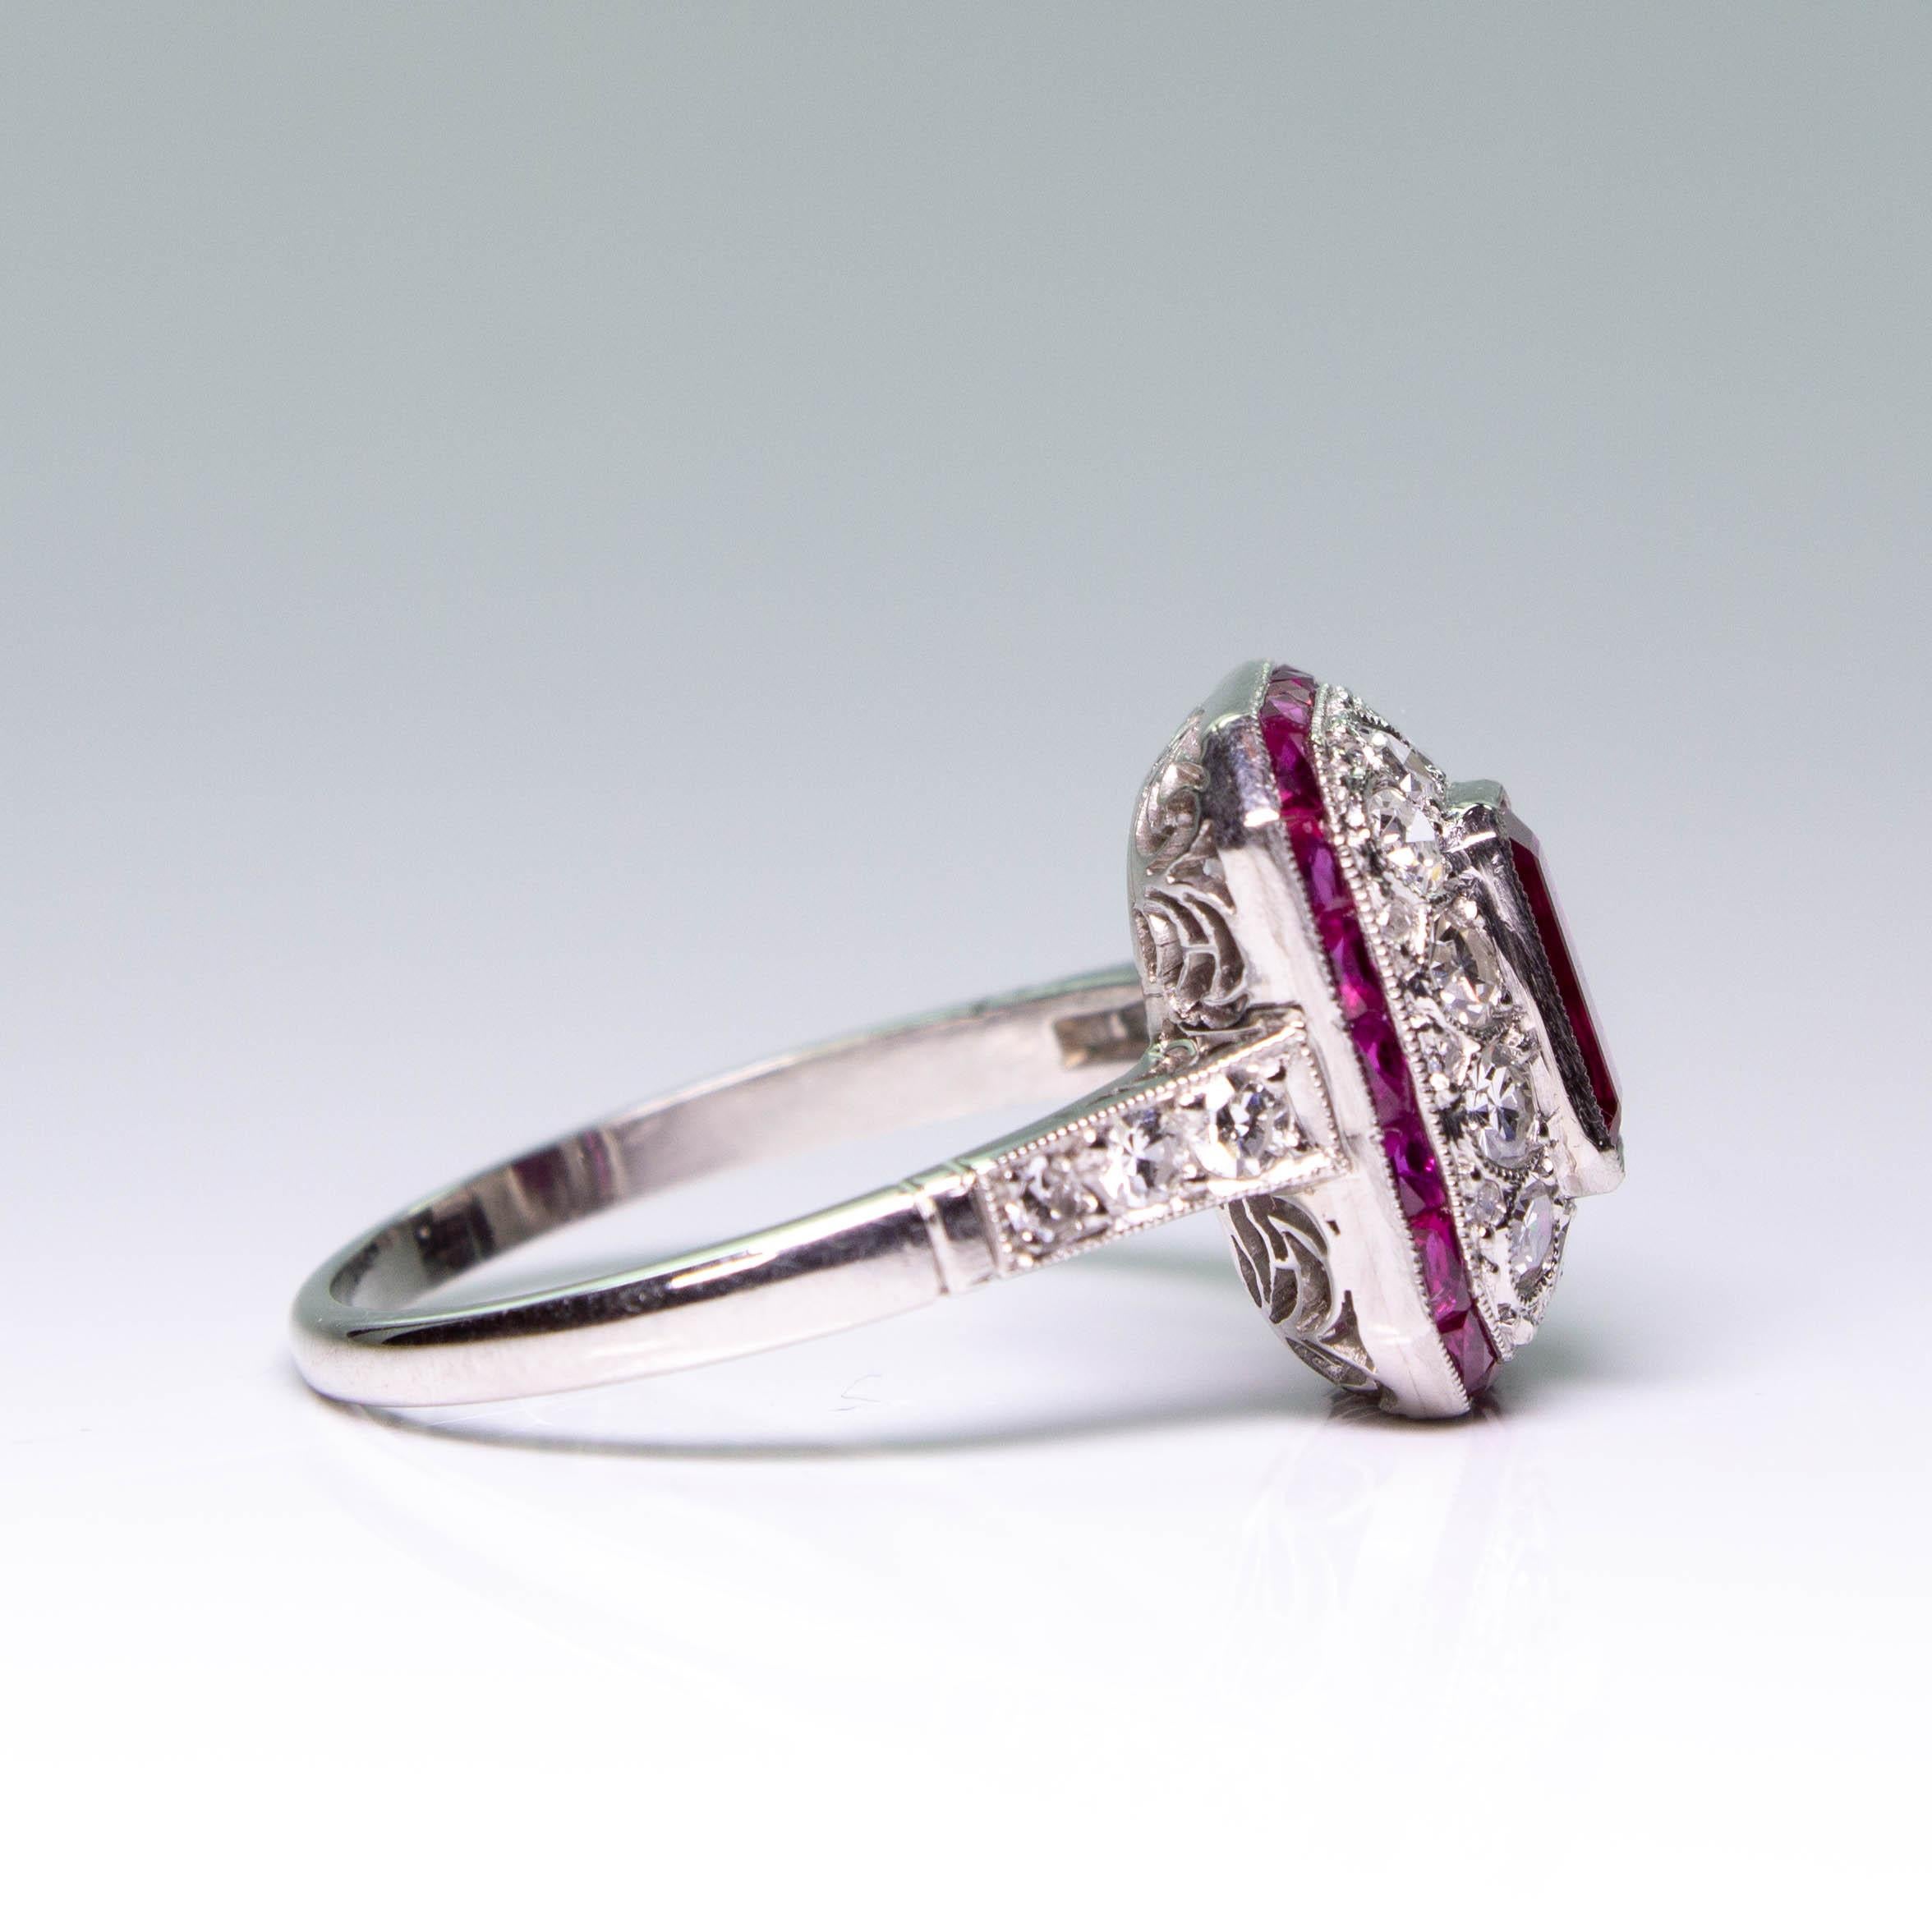 Composition: Platinum
Stones:
•	1 natural Emerald cut Burma Ruby that weighs 1.25ctw.
•	30 Single cut diamonds of H-VS2 quality that weigh 0.74ctw. 
•	22 natural French cut rubies that weigh 0.80ctw.
Ring size: 7 ¾    
Ring face:  14mm by 12mm 
Rise